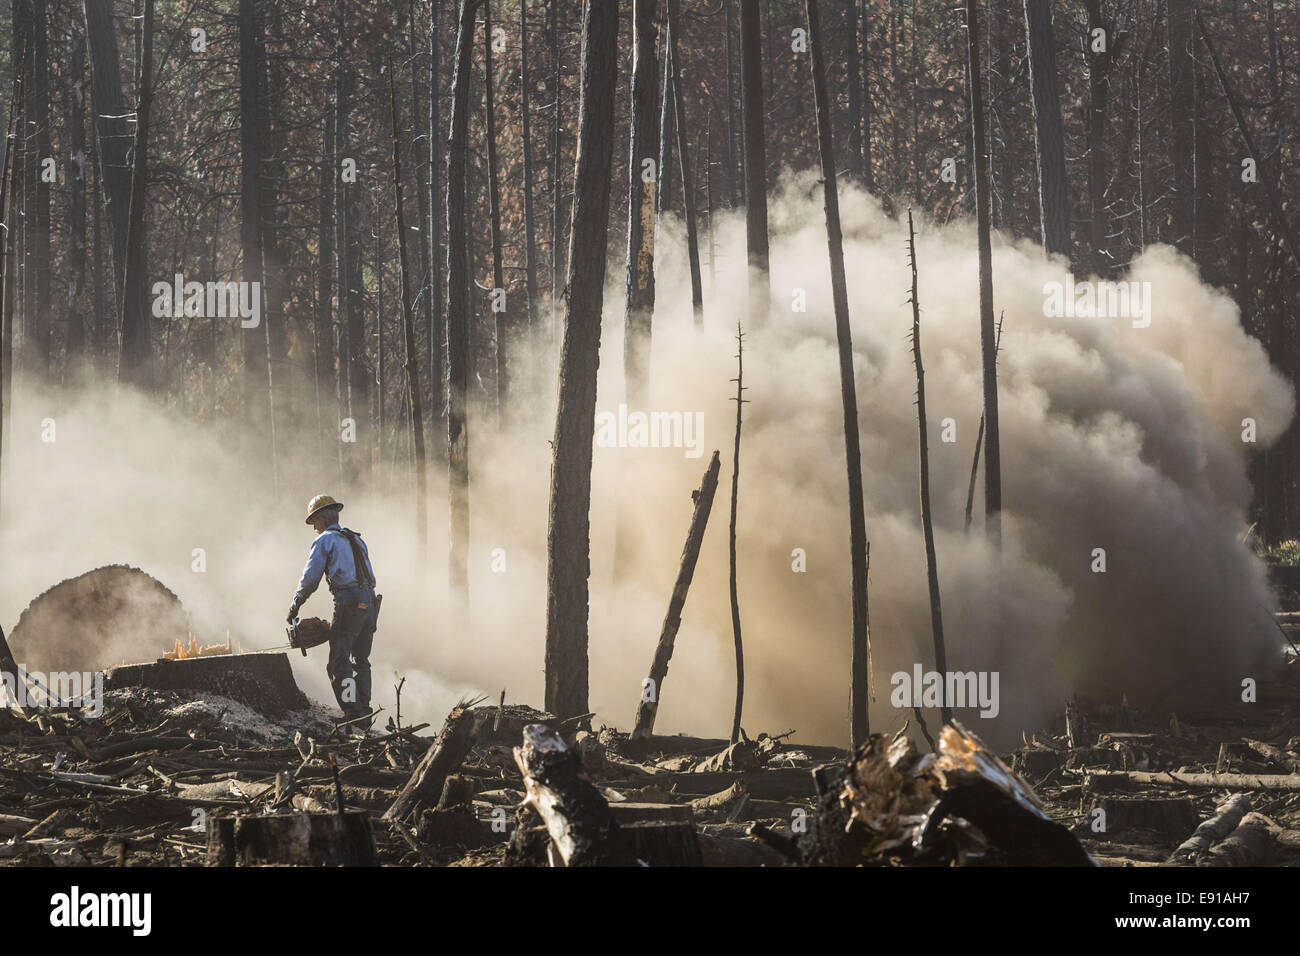 Groveland, California, USA. 16th Oct, 2014. October 16, 2014.BUTCH BRAY is nearly engulfed in dust and debris after falling a tree damaged during the Rim Fire in the Stanislaus National Forest along Evergreen Road near Yosemite National Park on Thursday, October 16, 2014. BRAY is contracted by Crooks Logging who won a bid to harvest lumber for Sierra Pacific Industries on this parcel of land. © Tracy Barbutes/ZUMA Wire/Alamy Live News Stock Photo